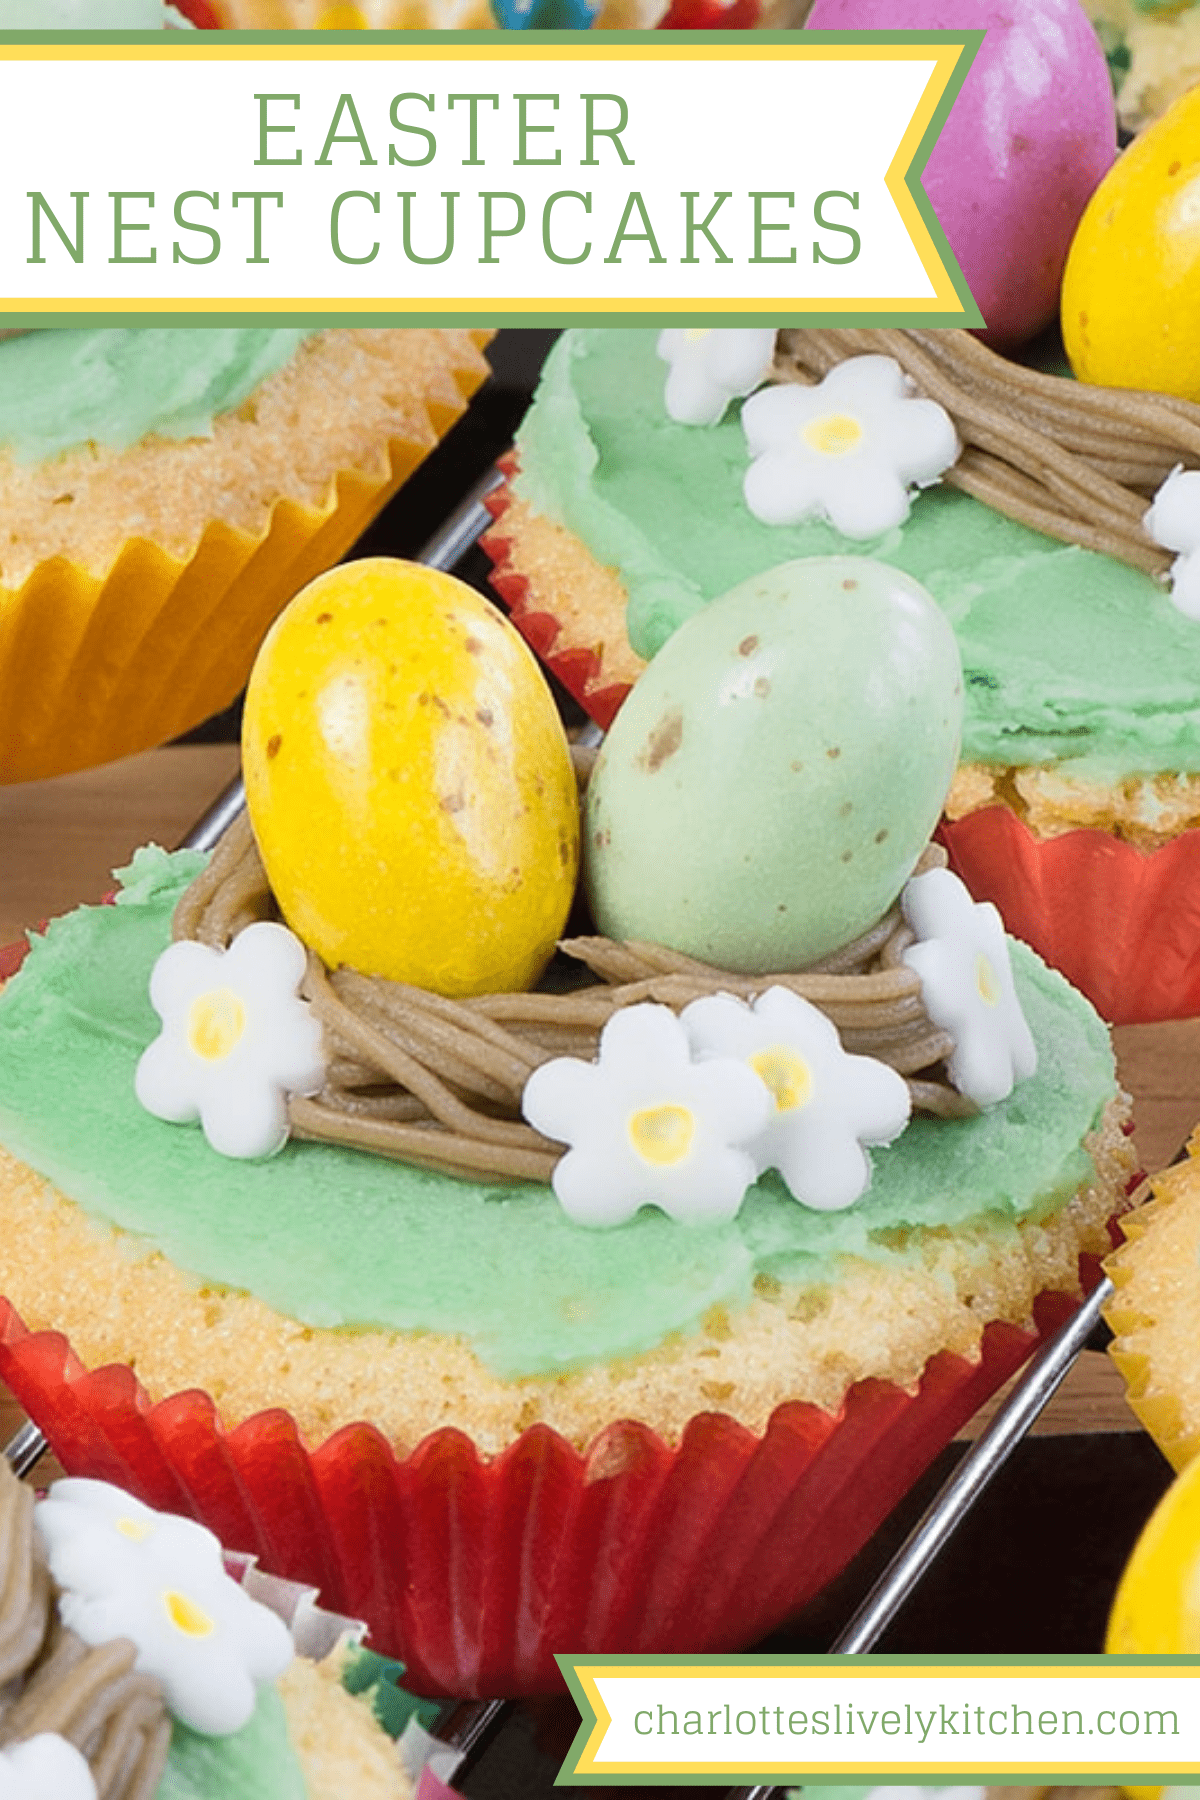 Pinterest graphics showing a close up of a decorated cupcake with the words easter nest cupcake at the top and the website name at the bottom. 